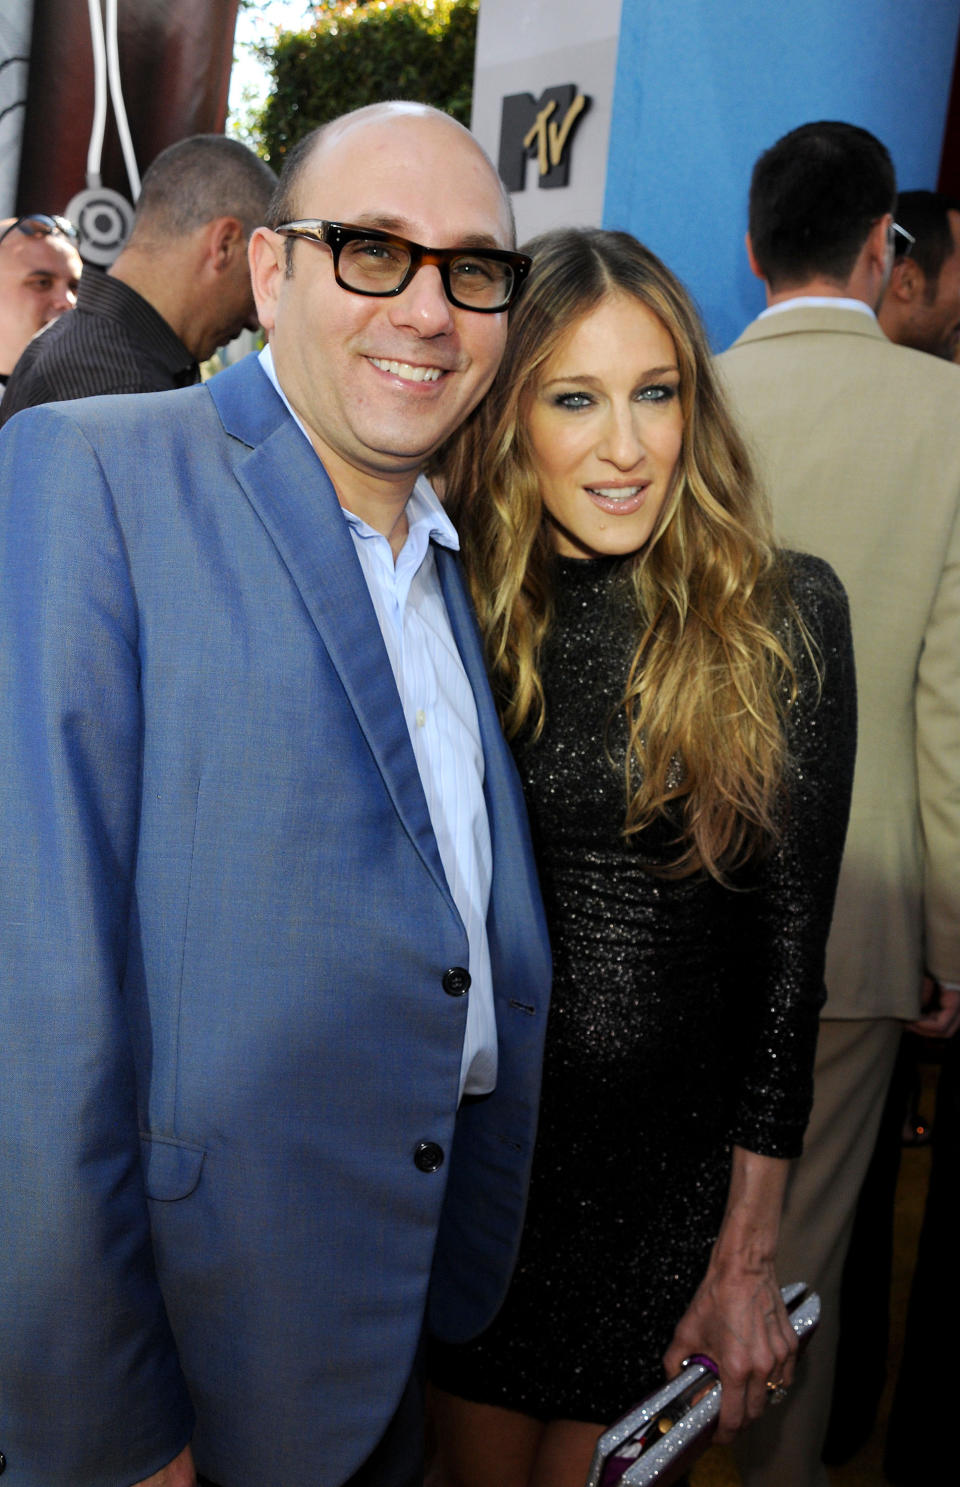 Actor Willie Garson and actress Sarah Jessica Parker arrive to the 2008 MTV Movie Awards at the Gibson Amphitheatre on June 1, 2008 in Universal City, California. (Photo by Jeff Kravitz/FilmMagic)